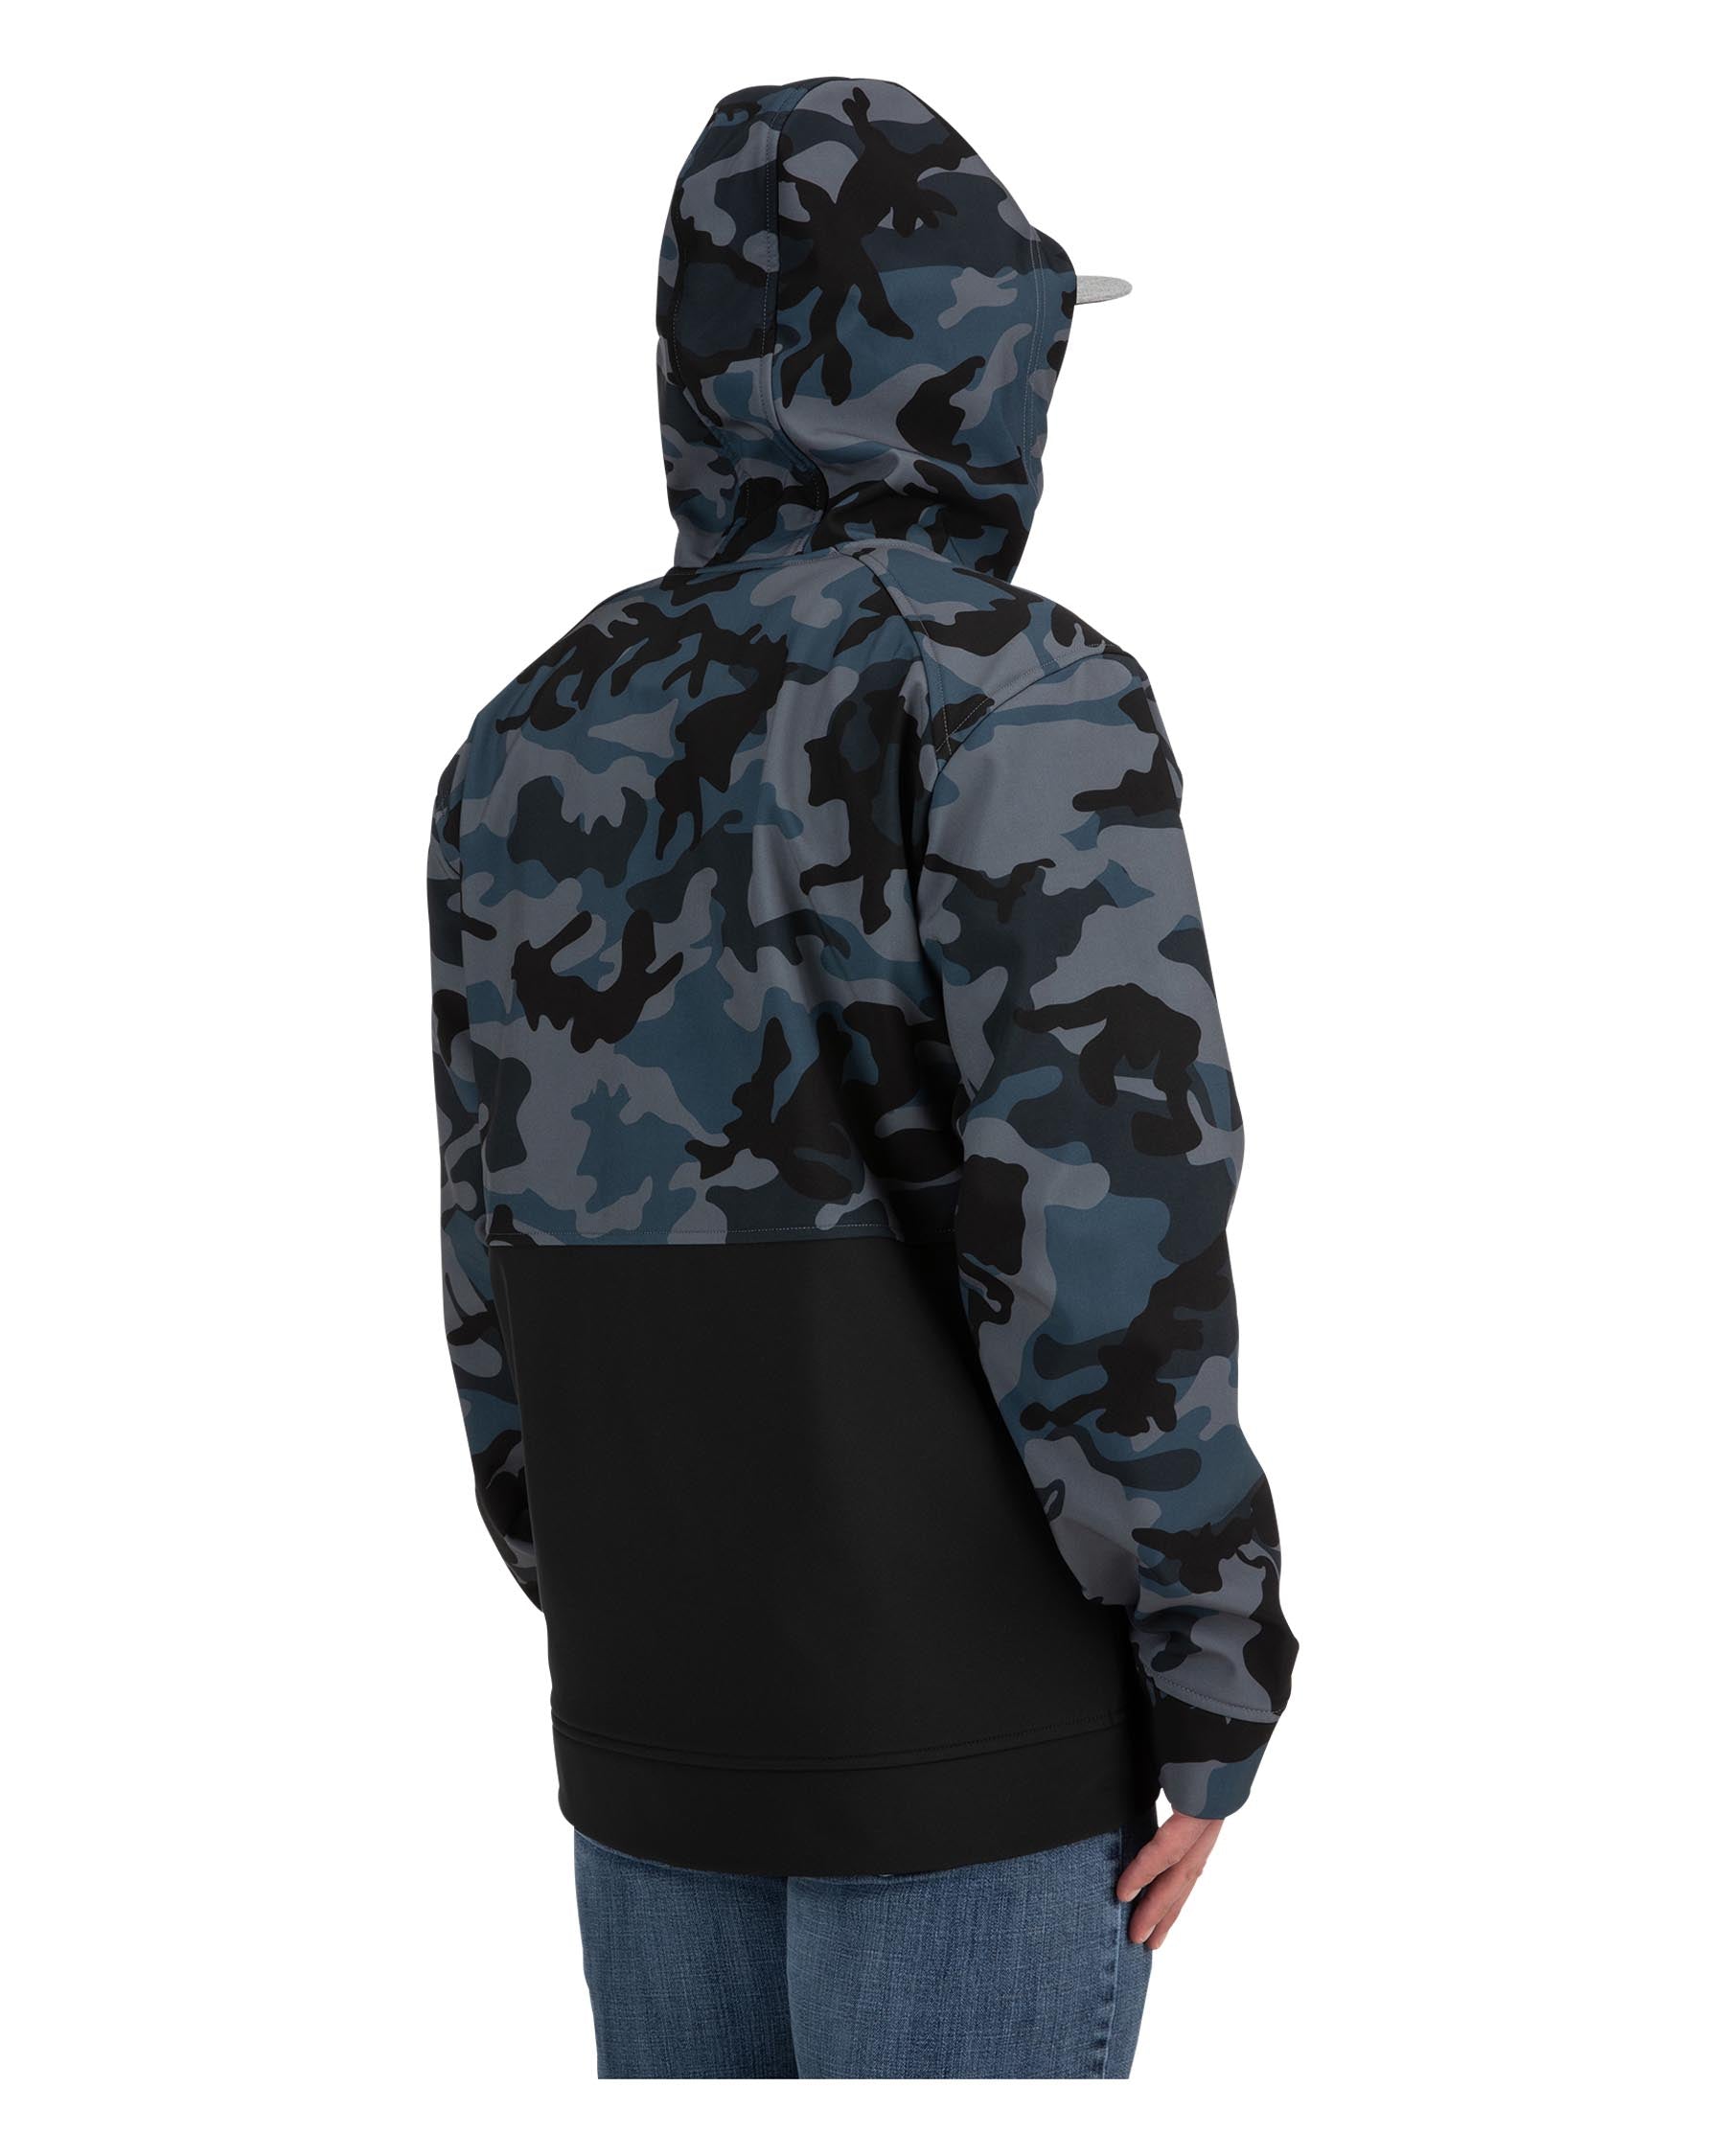 CLEARANCE SIMMS M's Rogue Hoody WOODLAND